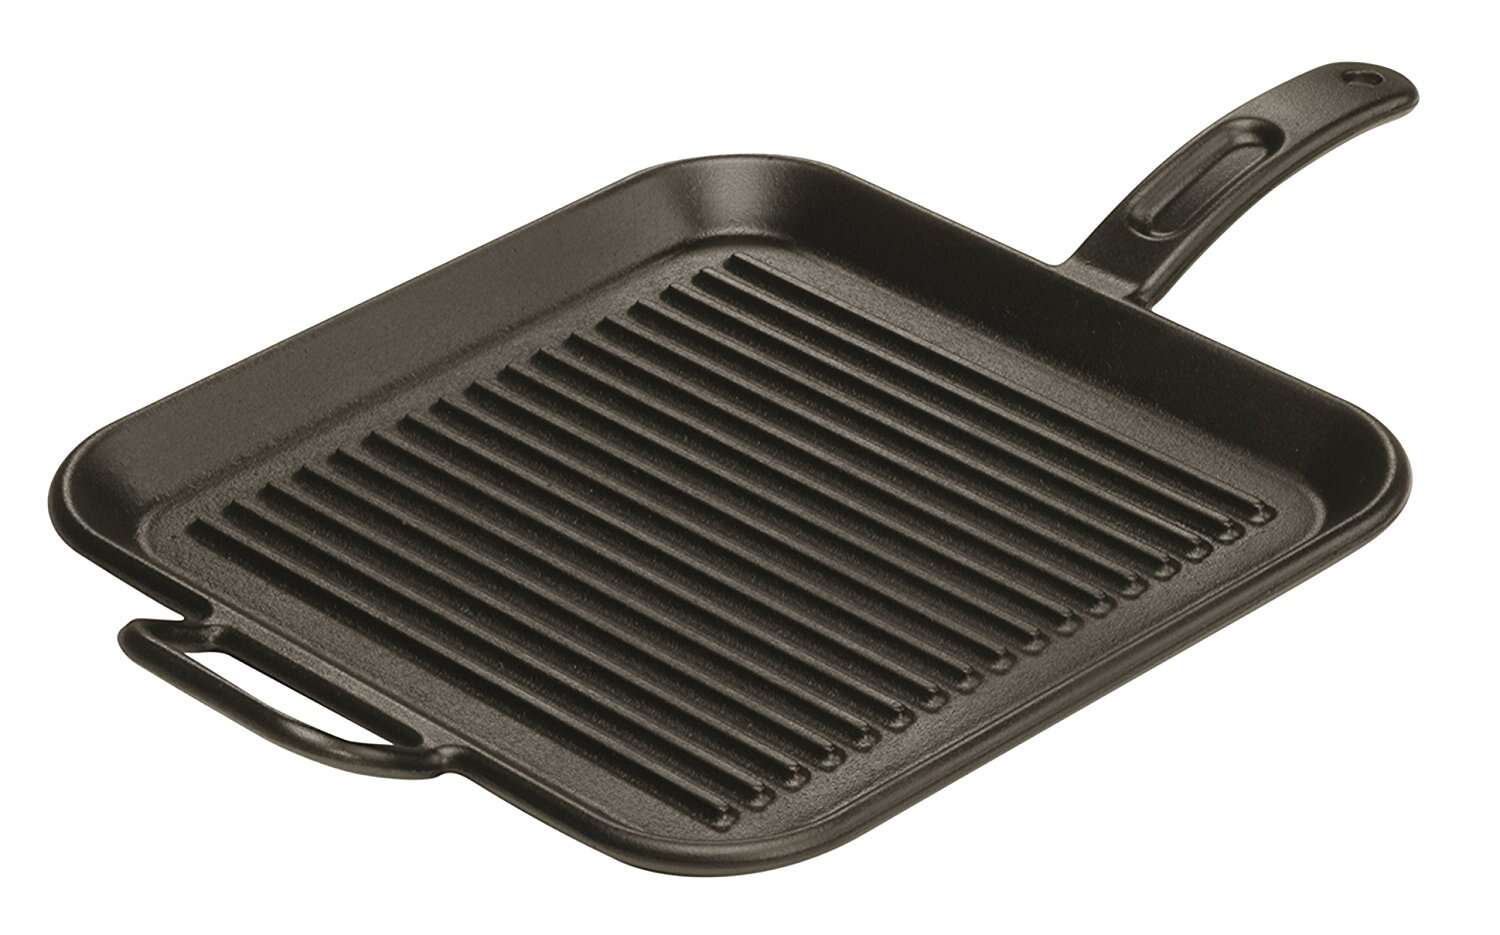 Best Way to Grill With Cast Iron